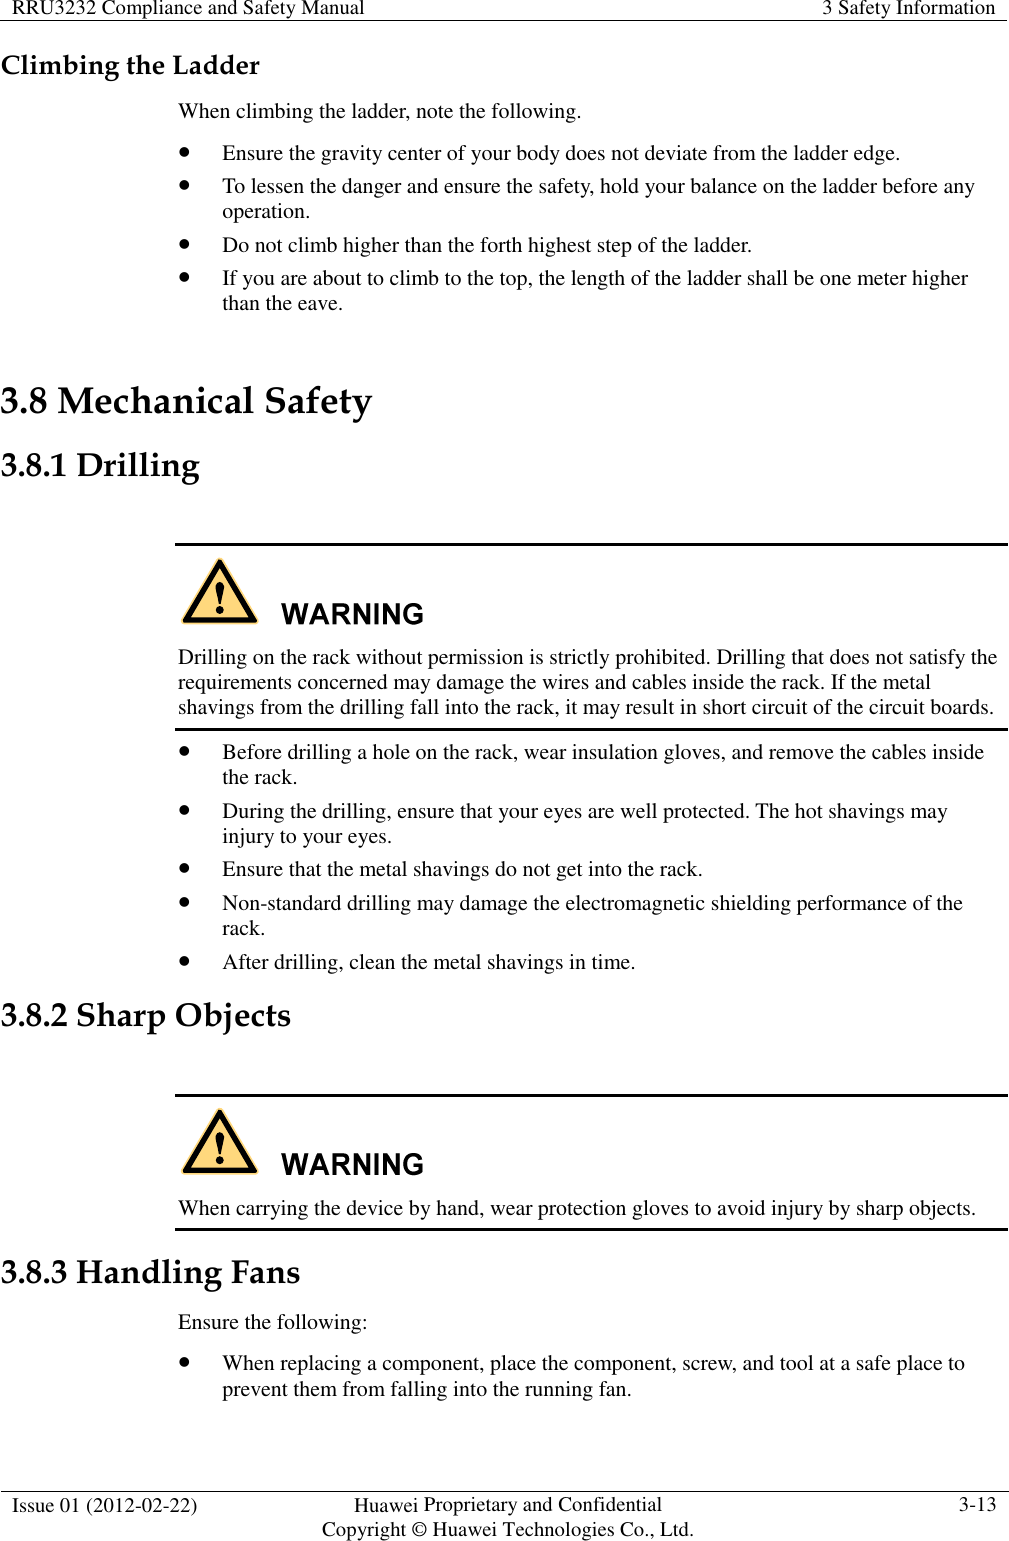 RRU3232 Compliance and Safety Manual  3 Safety Information  Issue 01 (2012-02-22)  Huawei Proprietary and Confidential           Copyright © Huawei Technologies Co., Ltd. 3-13  Climbing the Ladder When climbing the ladder, note the following.  Ensure the gravity center of your body does not deviate from the ladder edge.  To lessen the danger and ensure the safety, hold your balance on the ladder before any operation.  Do not climb higher than the forth highest step of the ladder.  If you are about to climb to the top, the length of the ladder shall be one meter higher than the eave. 3.8 Mechanical Safety 3.8.1 Drilling   Drilling on the rack without permission is strictly prohibited. Drilling that does not satisfy the requirements concerned may damage the wires and cables inside the rack. If the metal shavings from the drilling fall into the rack, it may result in short circuit of the circuit boards.  Before drilling a hole on the rack, wear insulation gloves, and remove the cables inside the rack.  During the drilling, ensure that your eyes are well protected. The hot shavings may injury to your eyes.  Ensure that the metal shavings do not get into the rack.  Non-standard drilling may damage the electromagnetic shielding performance of the rack.  After drilling, clean the metal shavings in time. 3.8.2 Sharp Objects   When carrying the device by hand, wear protection gloves to avoid injury by sharp objects. 3.8.3 Handling Fans Ensure the following:  When replacing a component, place the component, screw, and tool at a safe place to prevent them from falling into the running fan. 